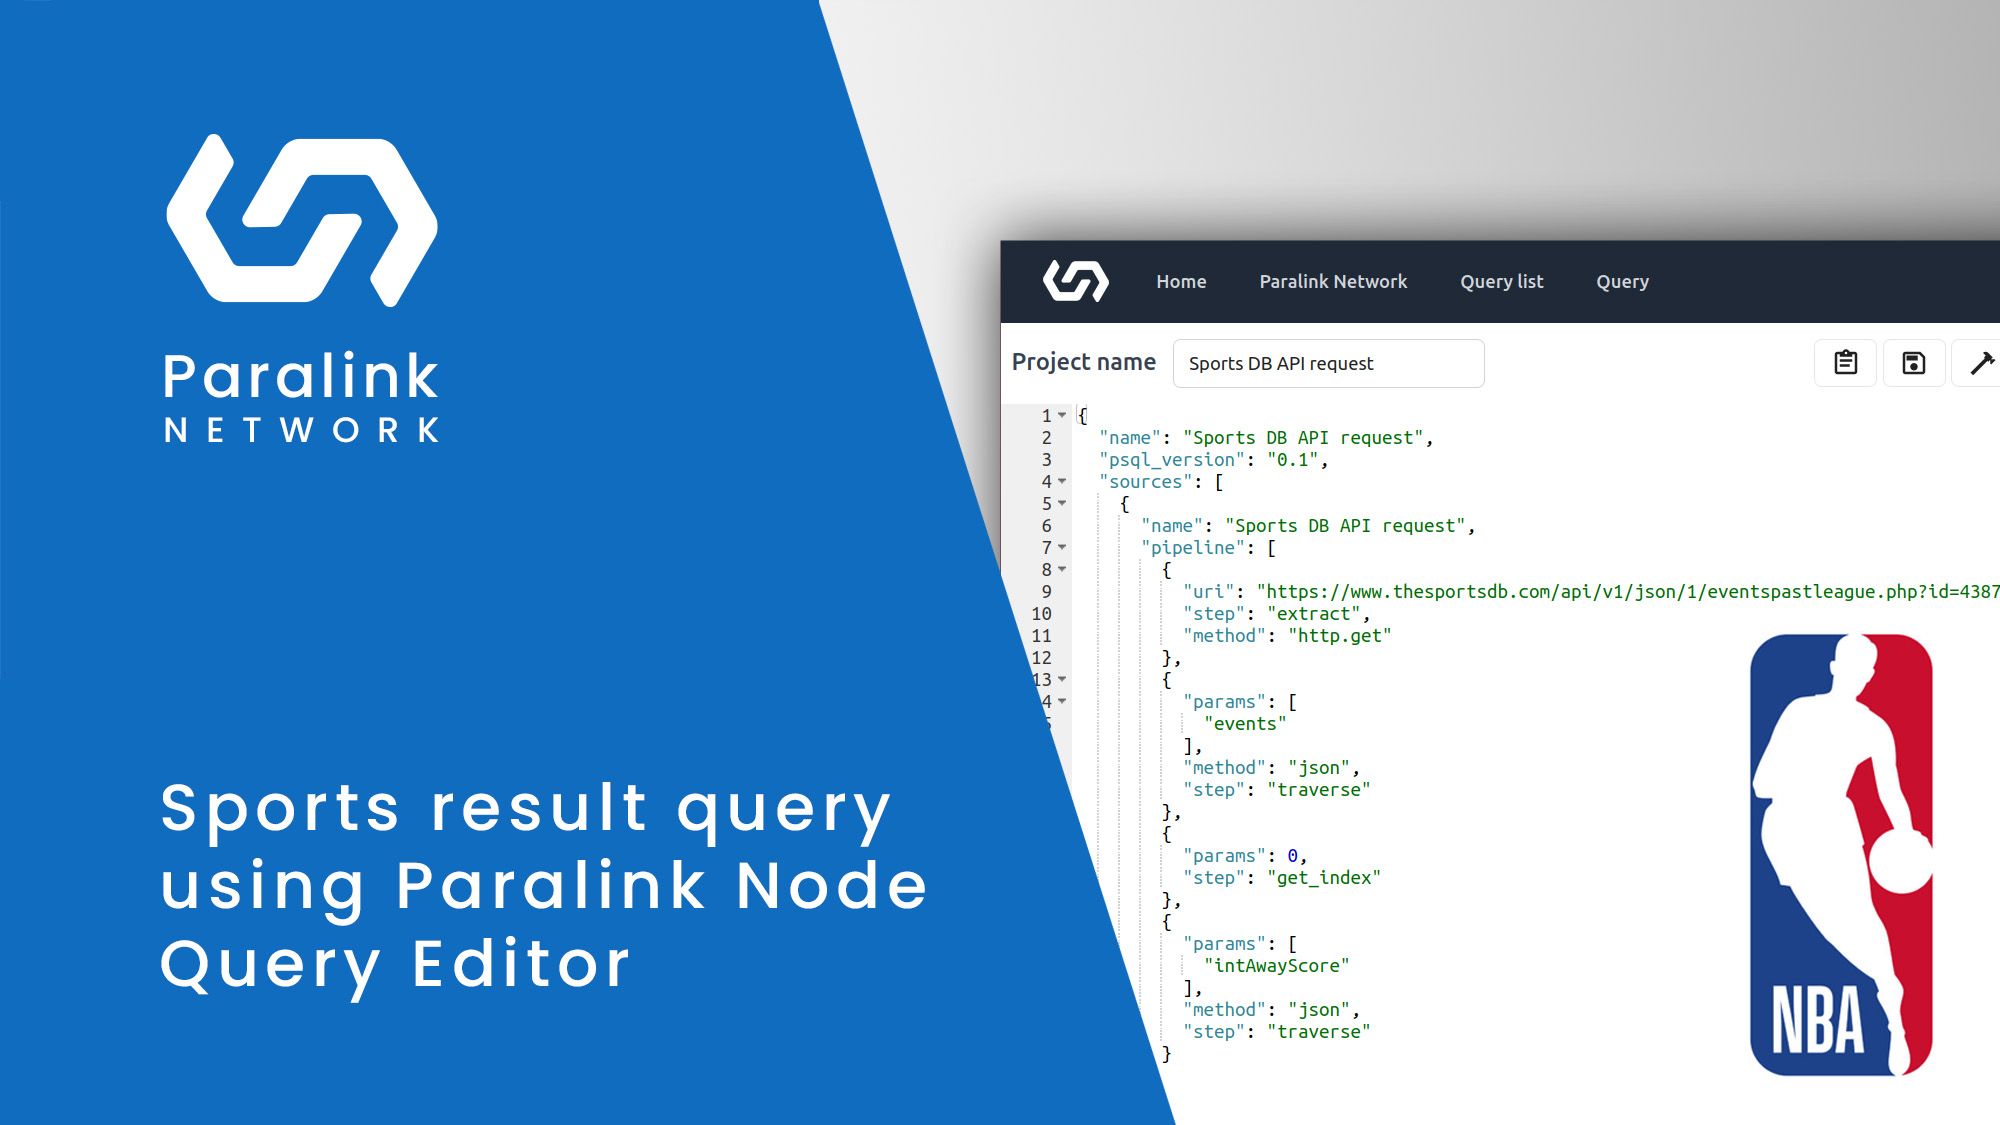 Sports result query demonstration using Paralink Node Query Editor